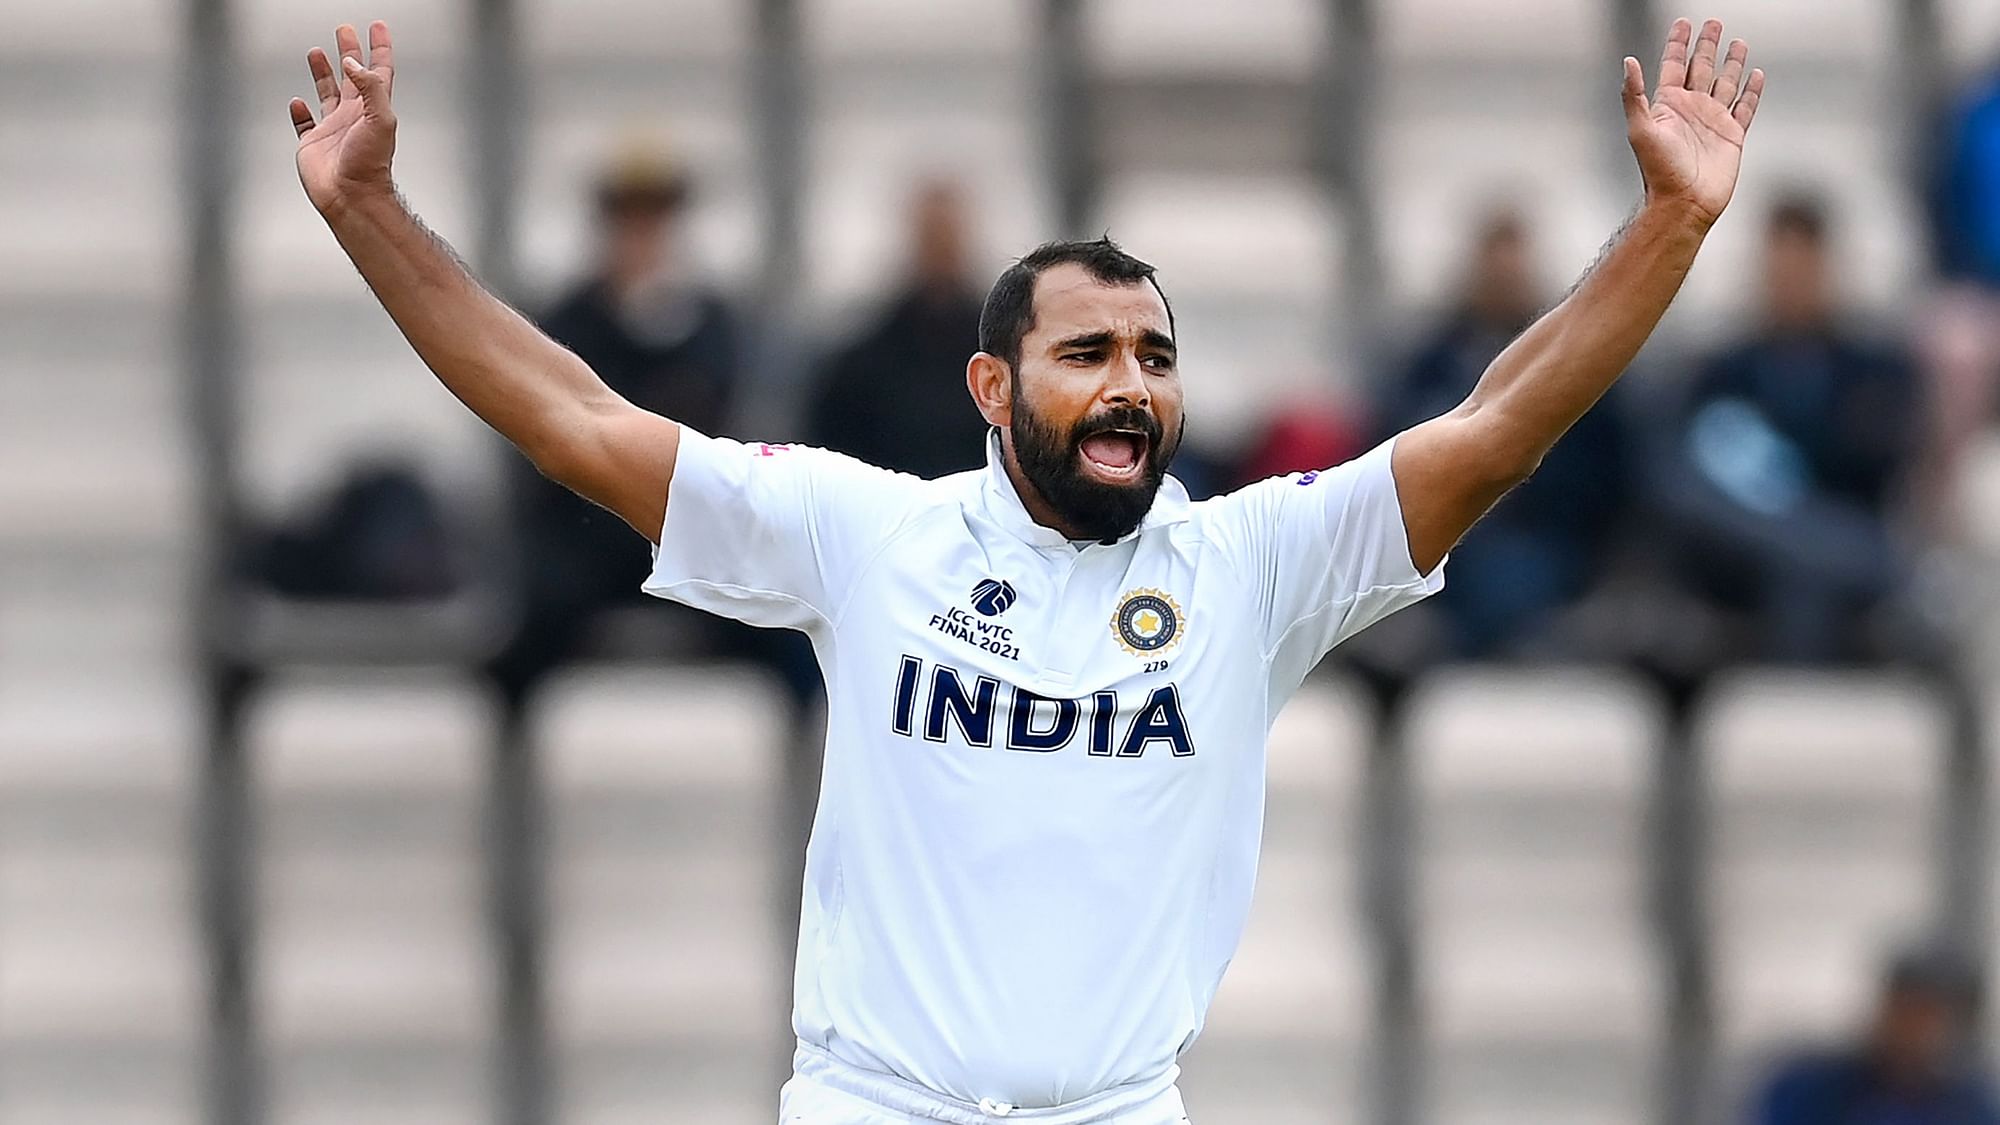 Mohammed Shami starred with a four-wicket-haul as India bowled New Zealand out for 249 on Day 5 of the WTC Final.&nbsp;